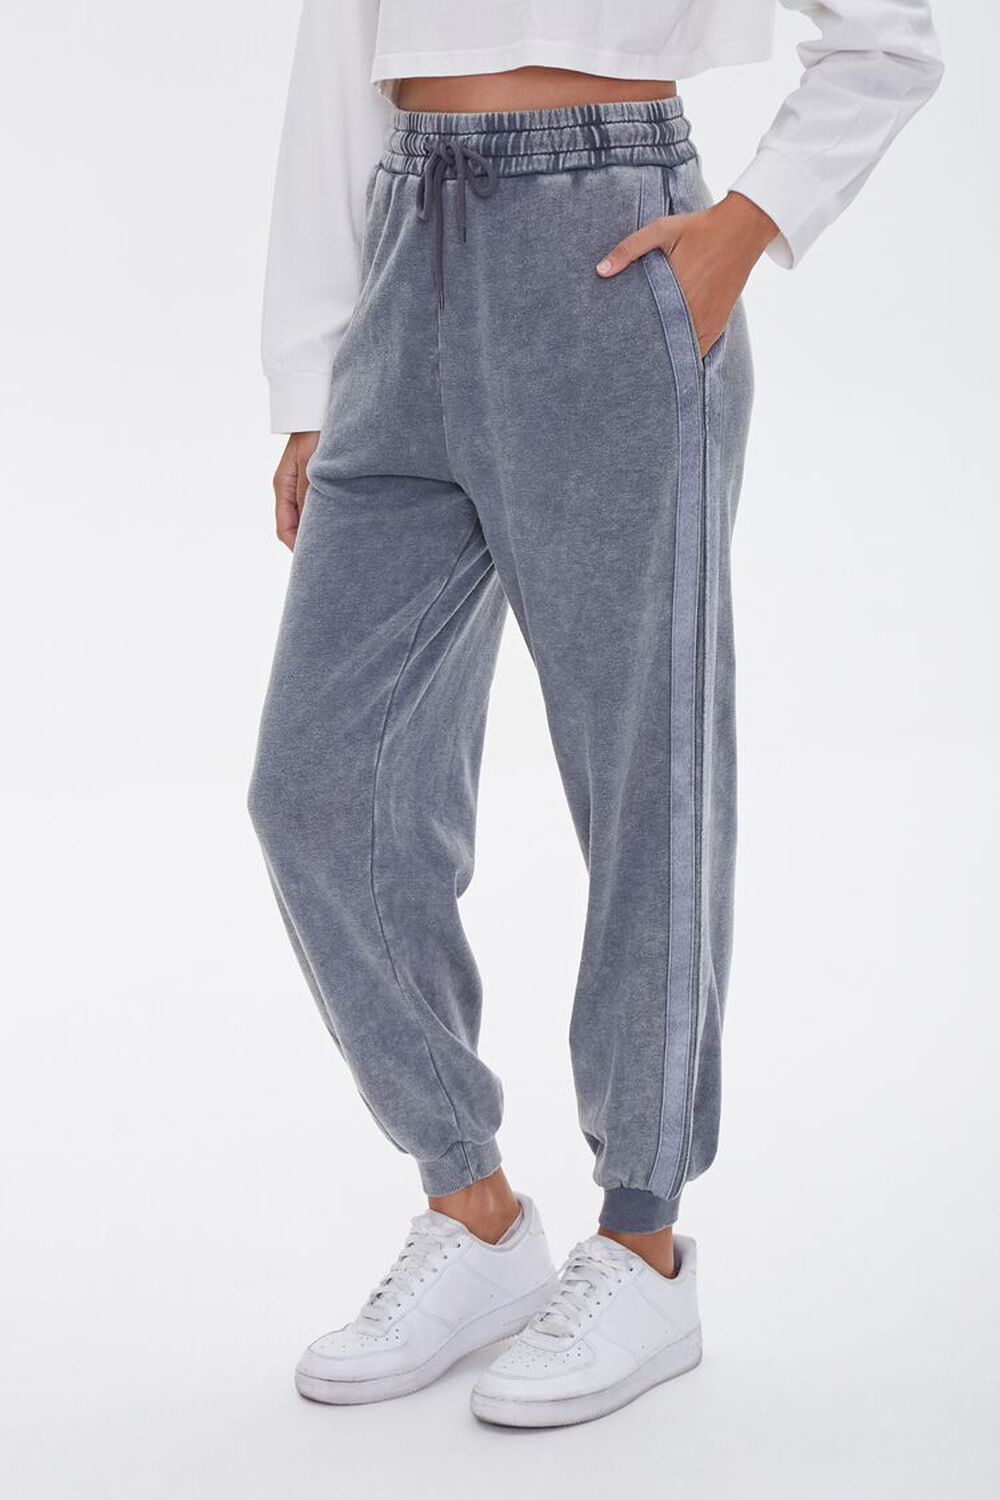 CHARCOAL Side-Striped French Terry Joggers, image 1